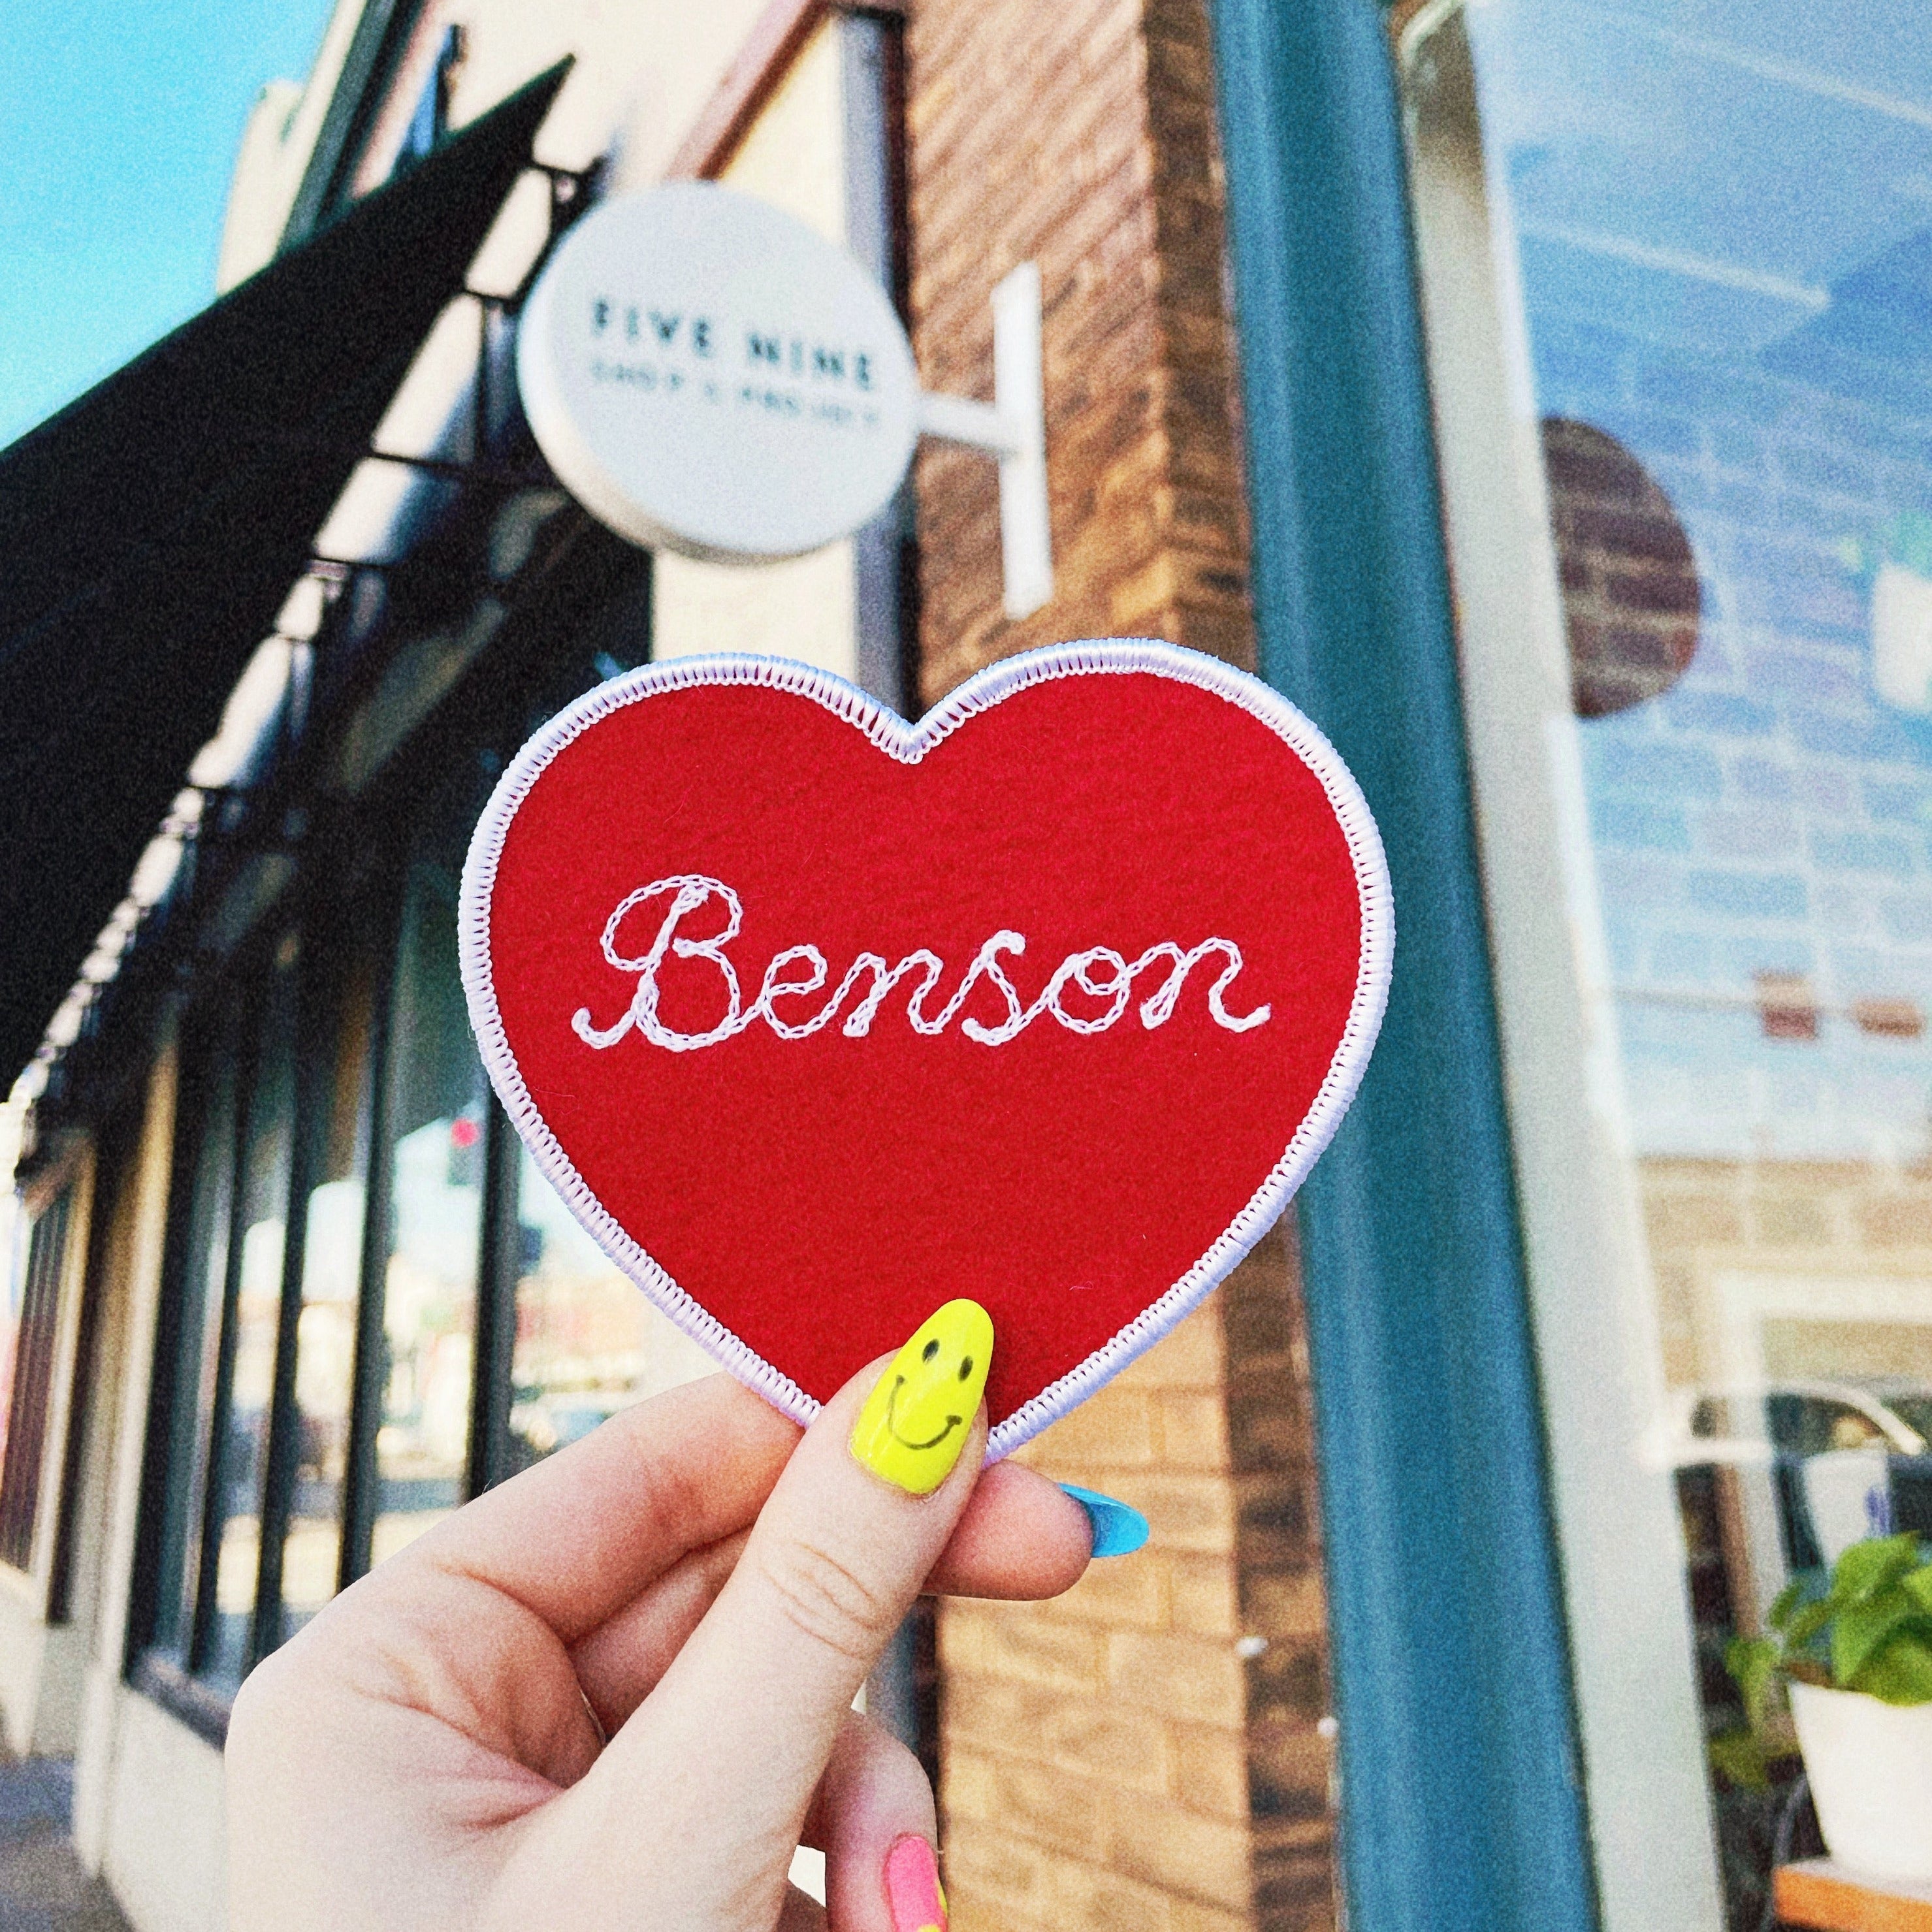 Chain-Stitched "Benson" Heart Patch